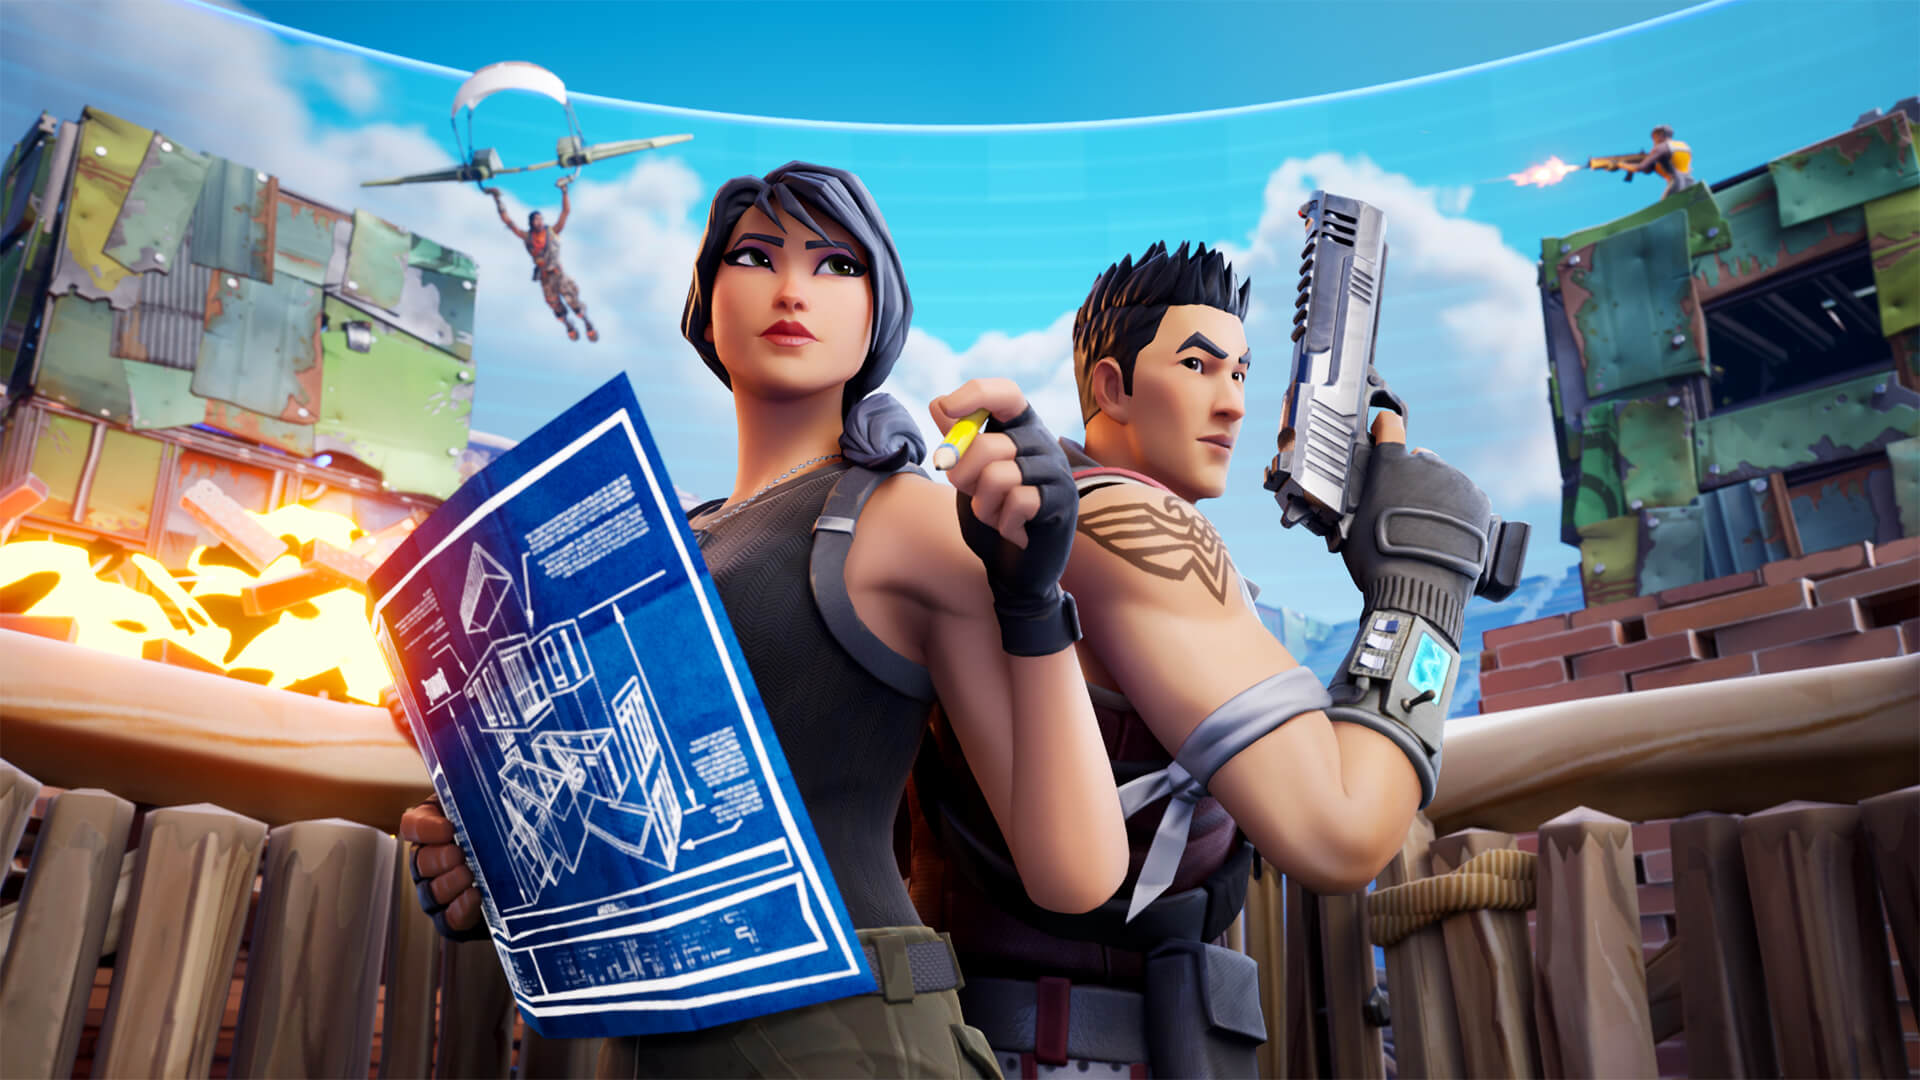 ‘Fortnite’ Update Includes Mention of Oculus, Suggesting Future Quest Support – Road to VR